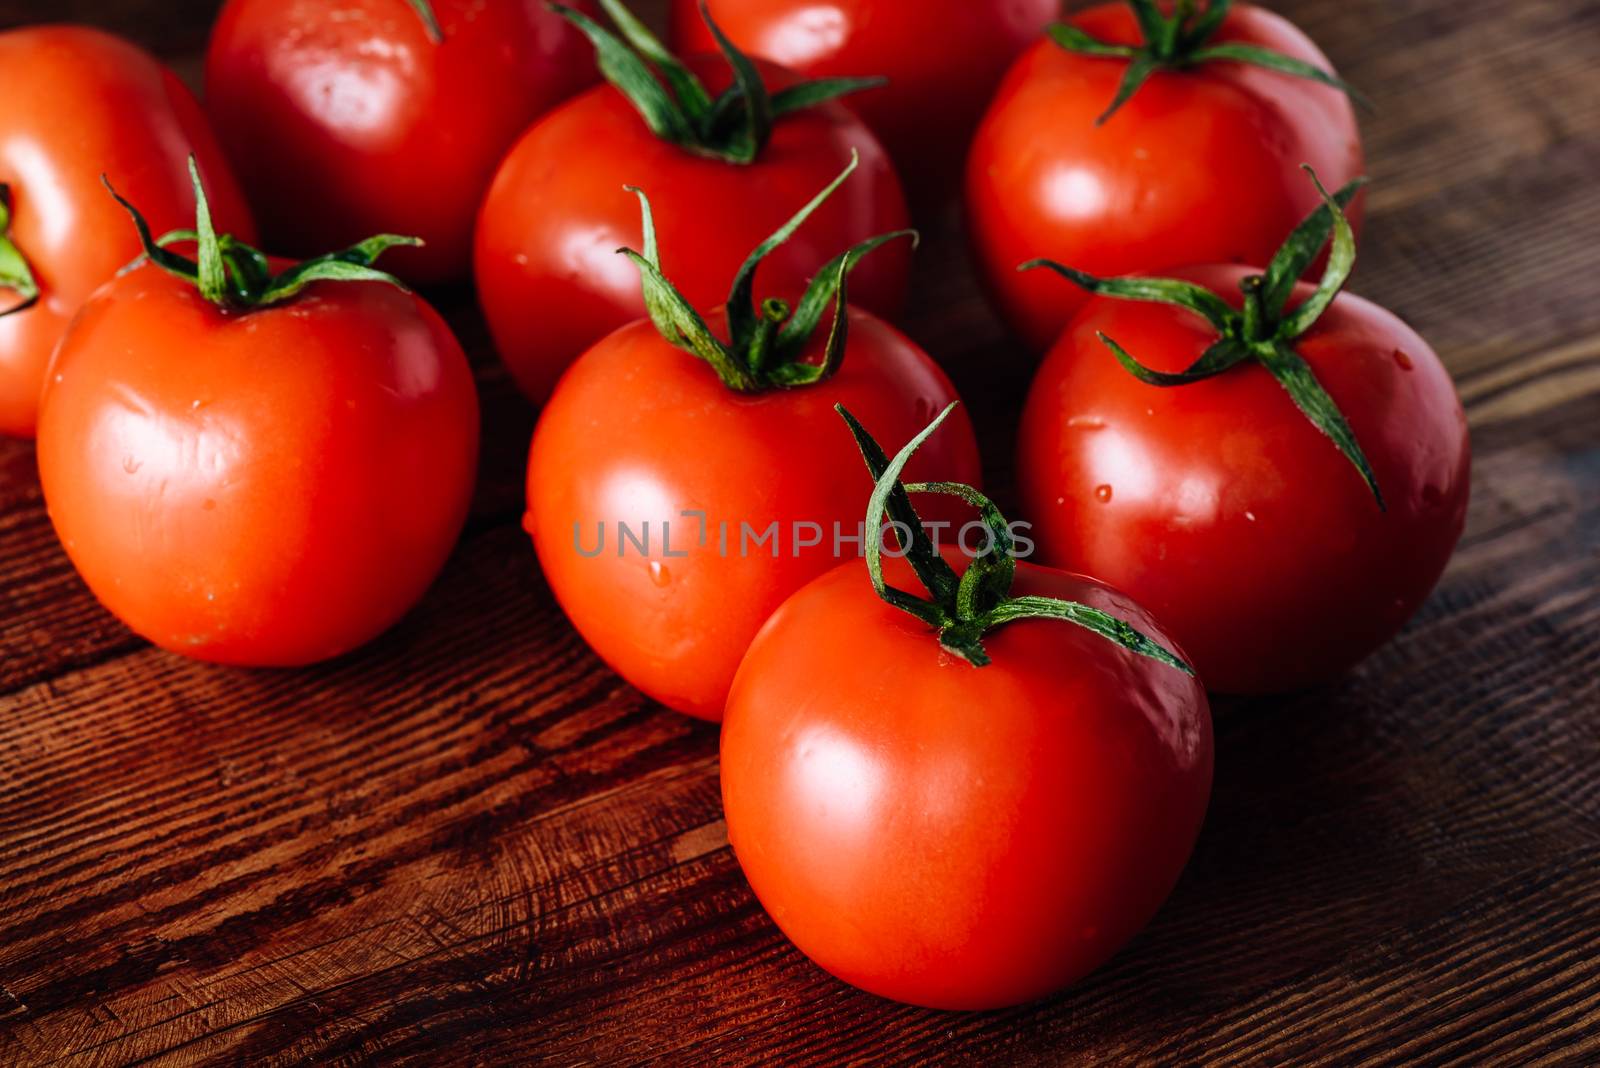 Some Red and Fresh Tomatoes on Wooden Table